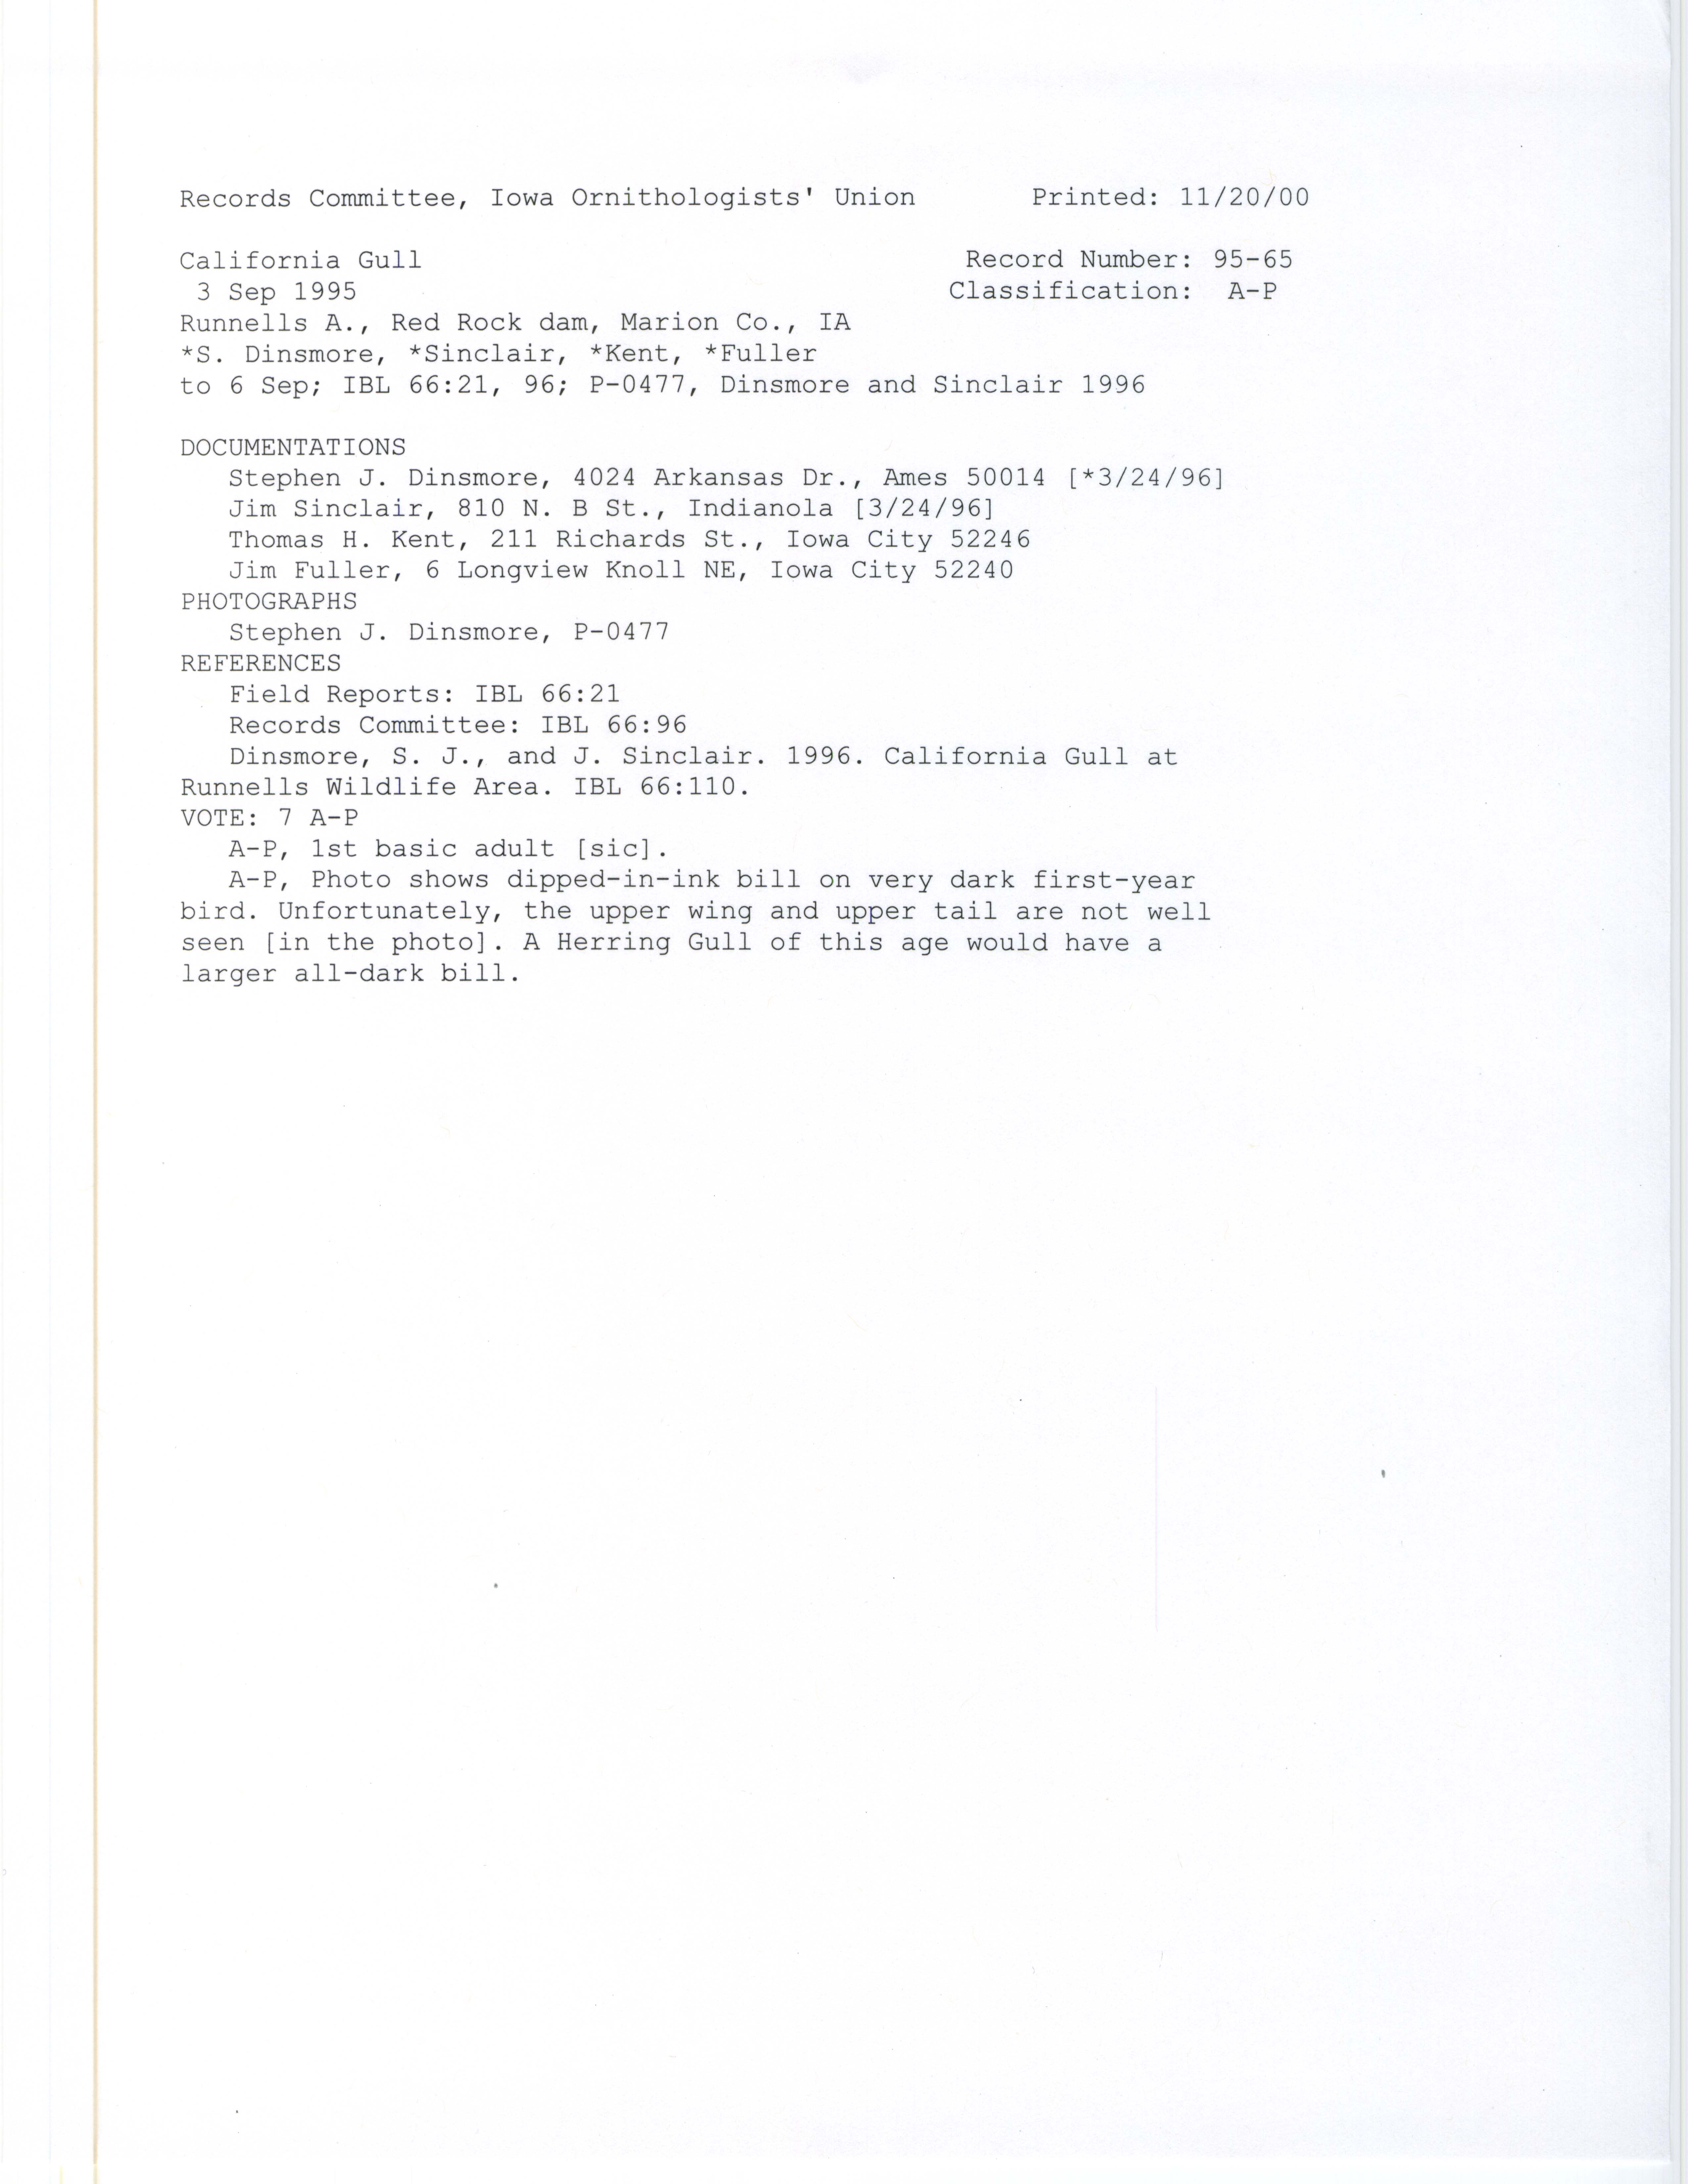 Records Committee review for rare bird sighting of California Gull at Runnells Wildlife Area, 1995